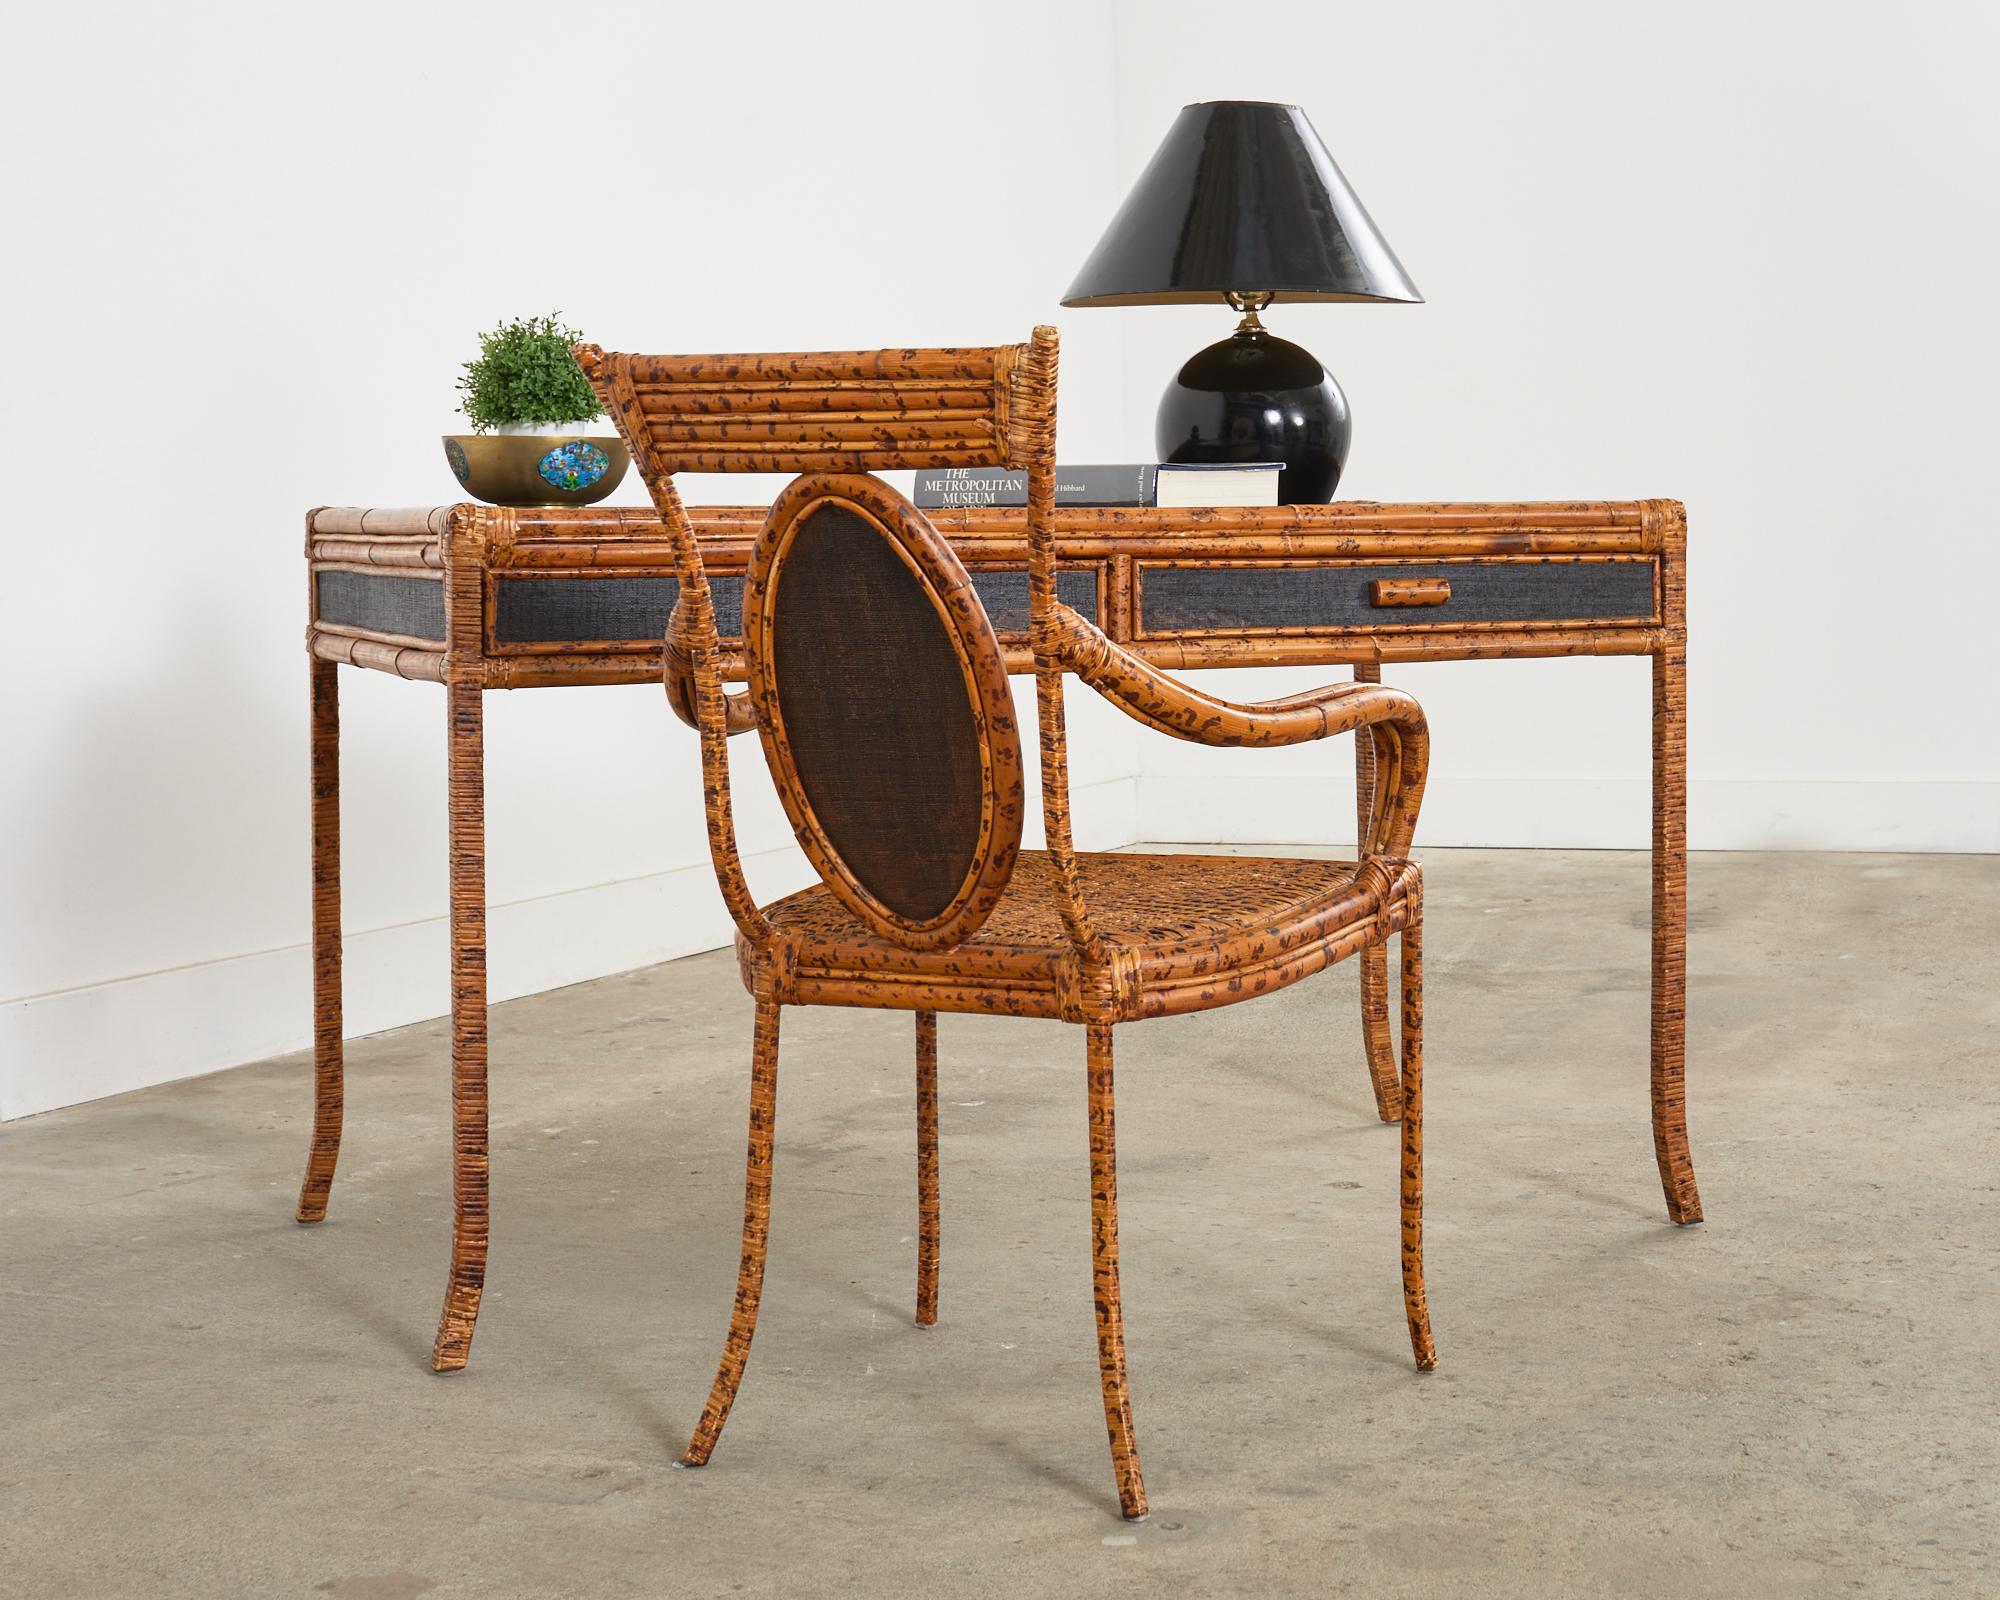 Wonderful organic modern writing table or desk featuring a strong iron frame wrapped with gorgeous tortoise shell bamboo and rattan. The top of the desk and sides have a lovely grasscloth inset finished in black lacquer. Fronted by two storage